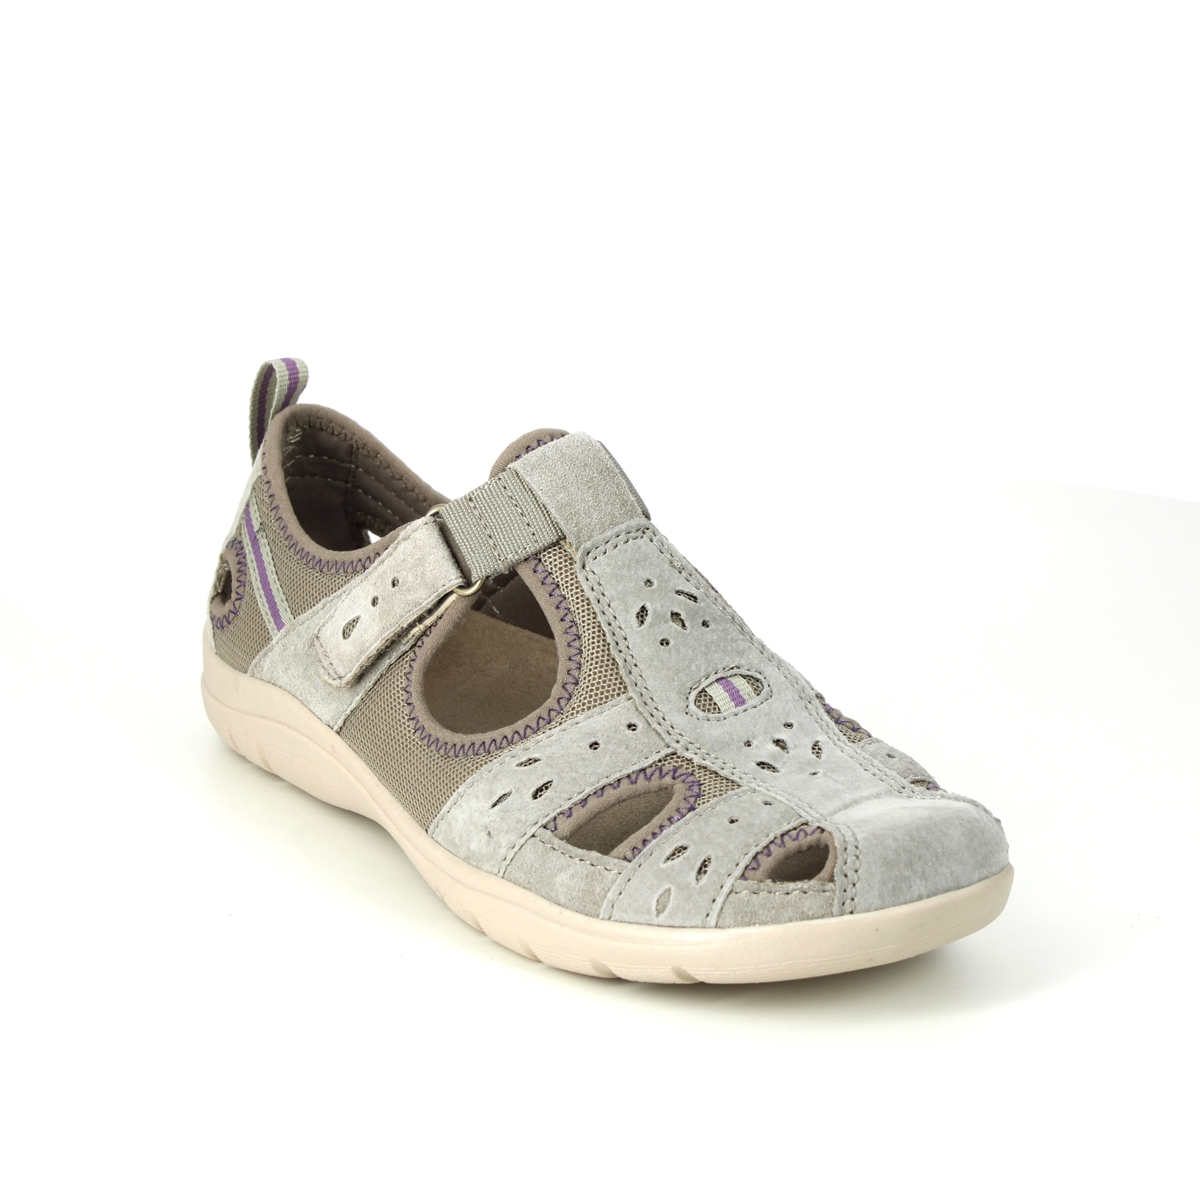 Earth Spirit Cleveland 01 Taupe Suede Womens Closed Toe Sandals 30324-50 In Size 4 In Plain Taupe Suede